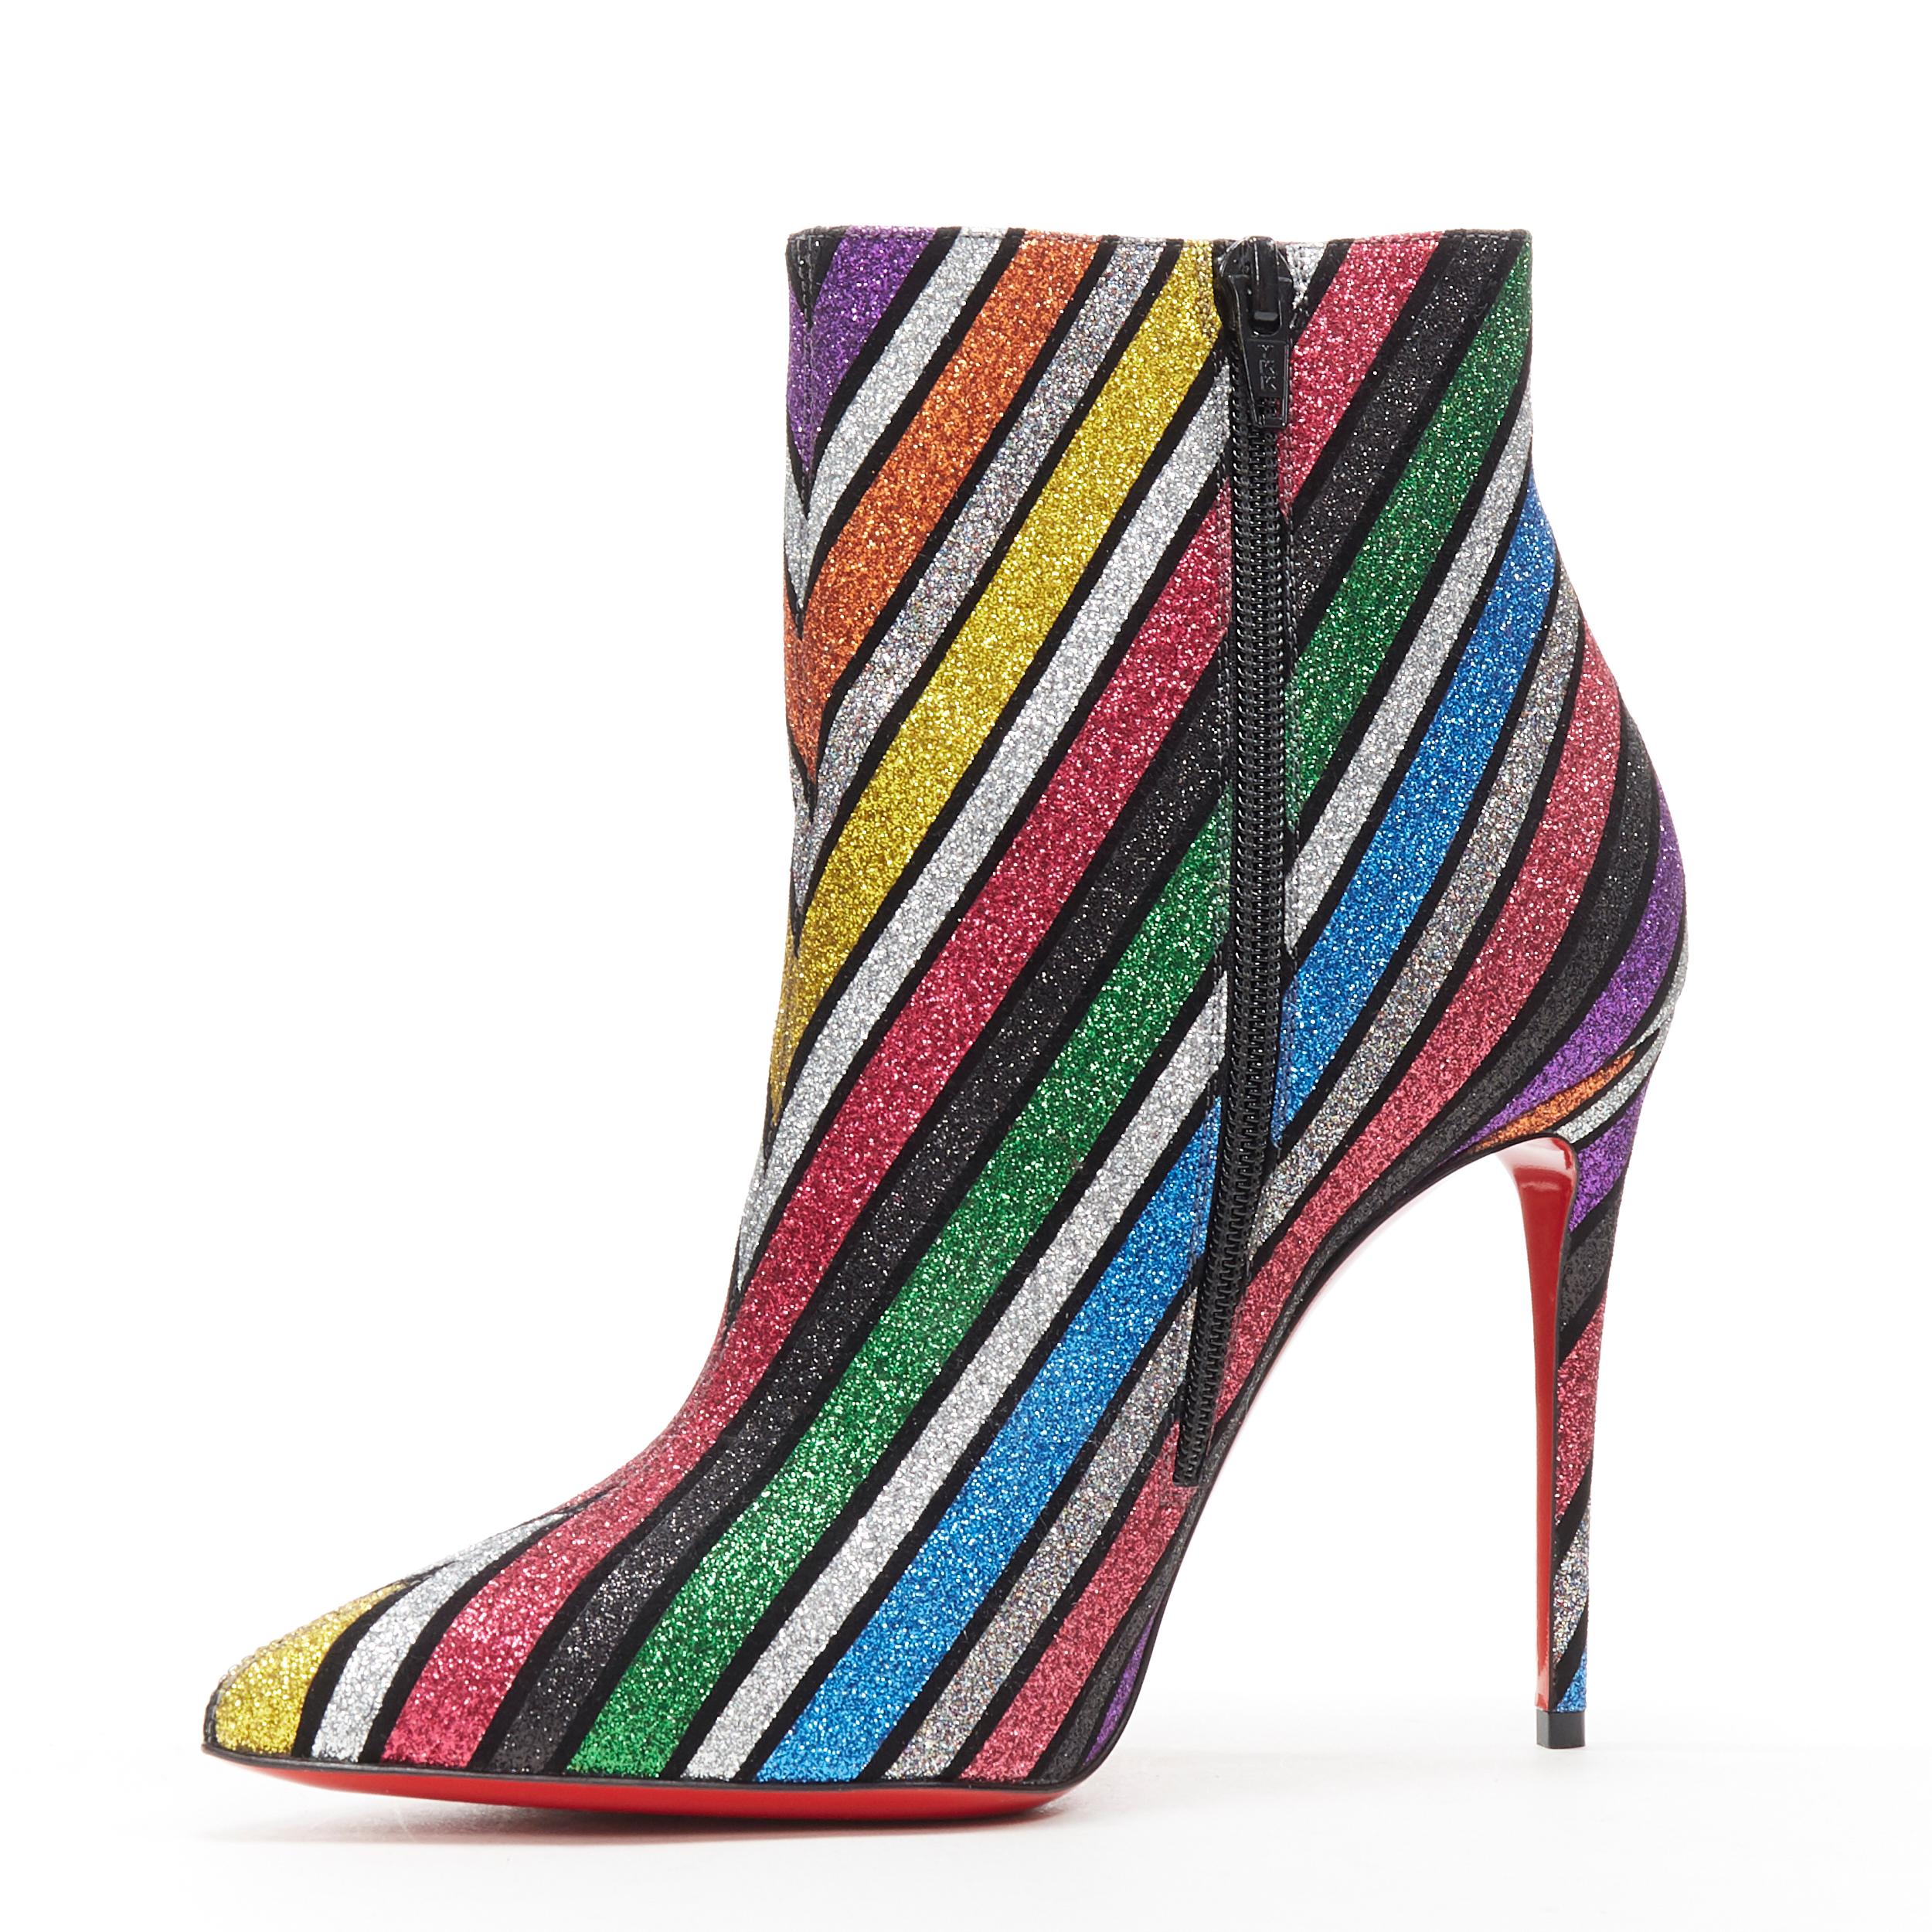 new CHRISTIAN LOUBOUTIN So Kate Booty 100 glitter multi stripe ankle boots EU37
Brand: Christian Louboutin
Designer: Christian Louboutin
Model Name / Style: So Kate Booty 100
Material: Leather
Color: Multicolour
Pattern: Striped
Closure: Zip
Extra